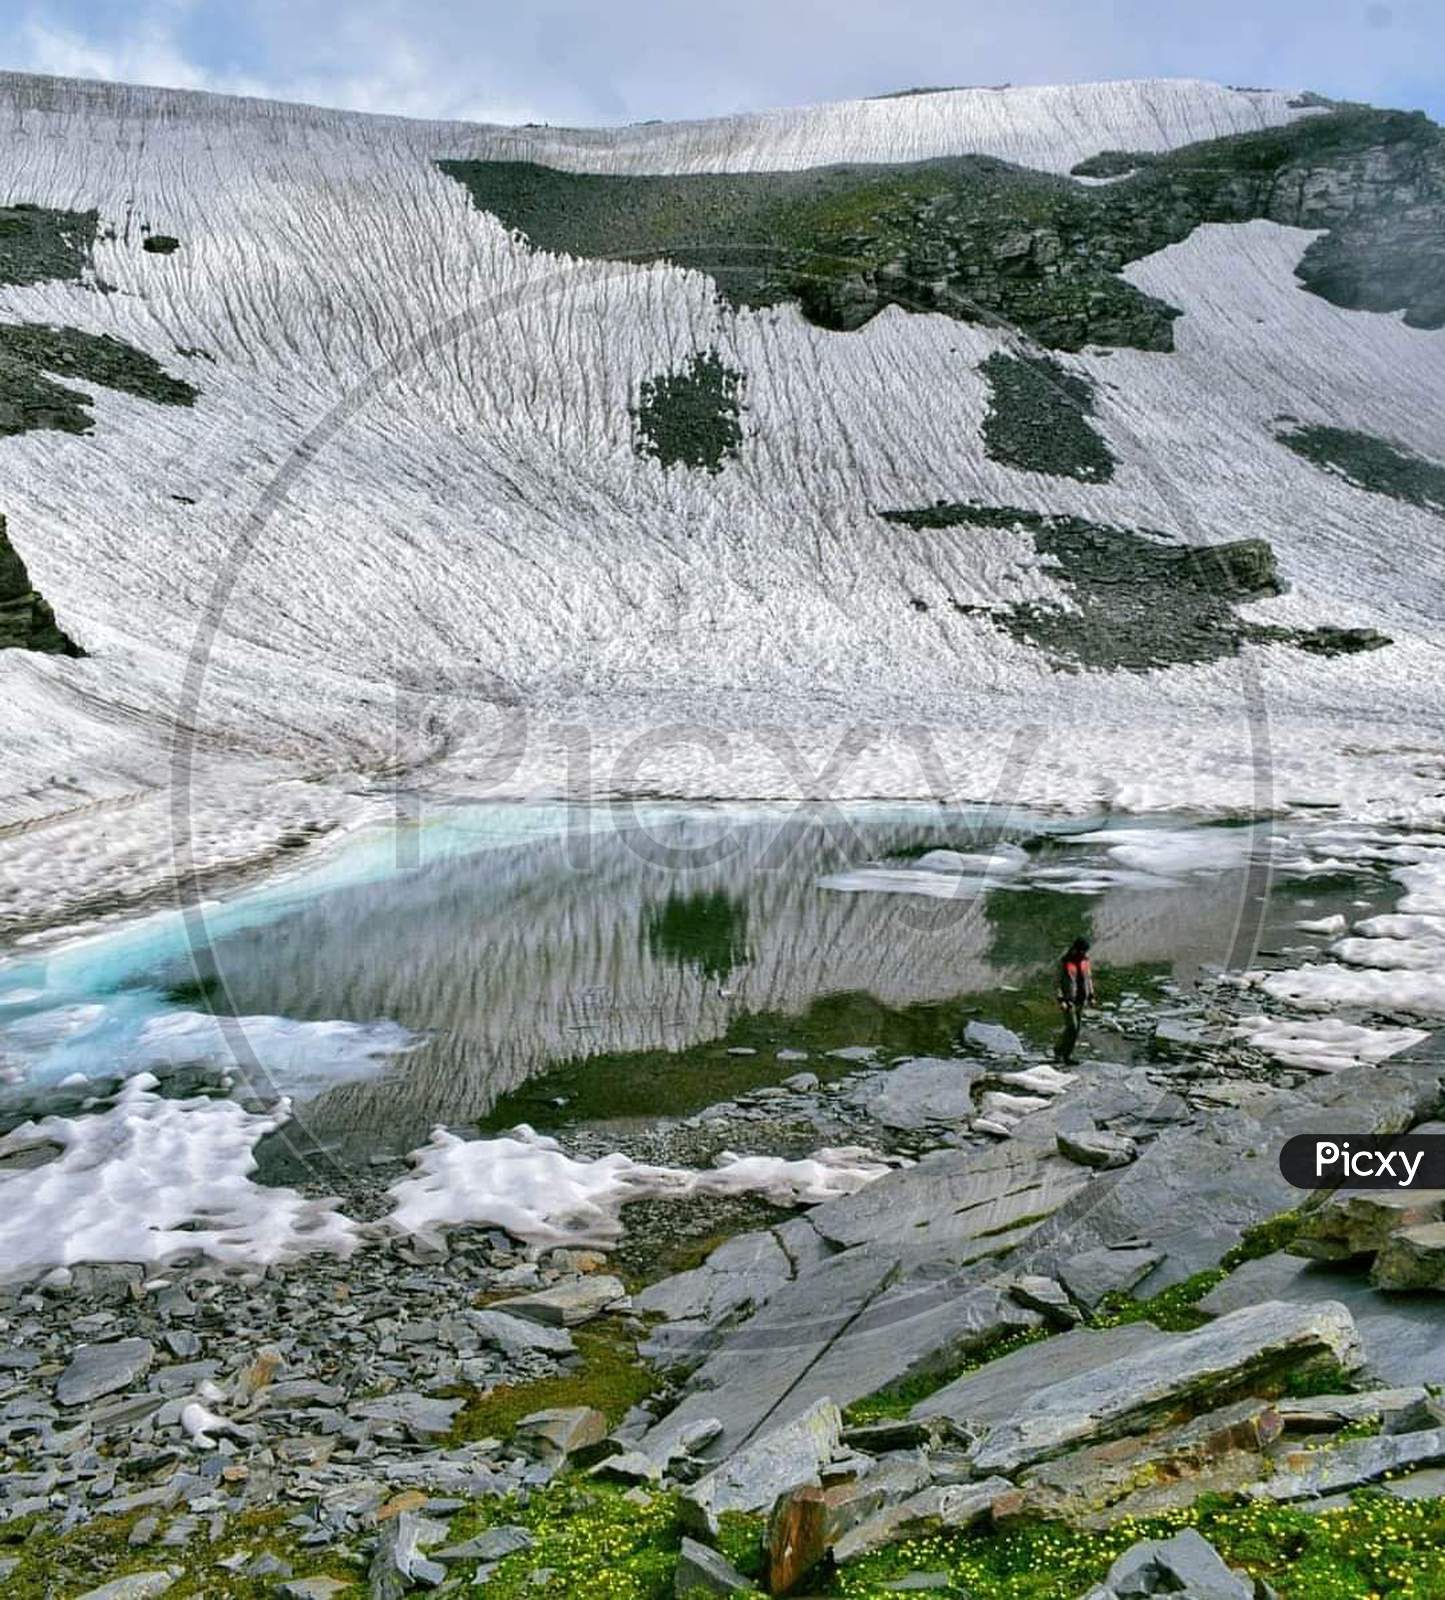 Pic of pond between montain top melting glacier